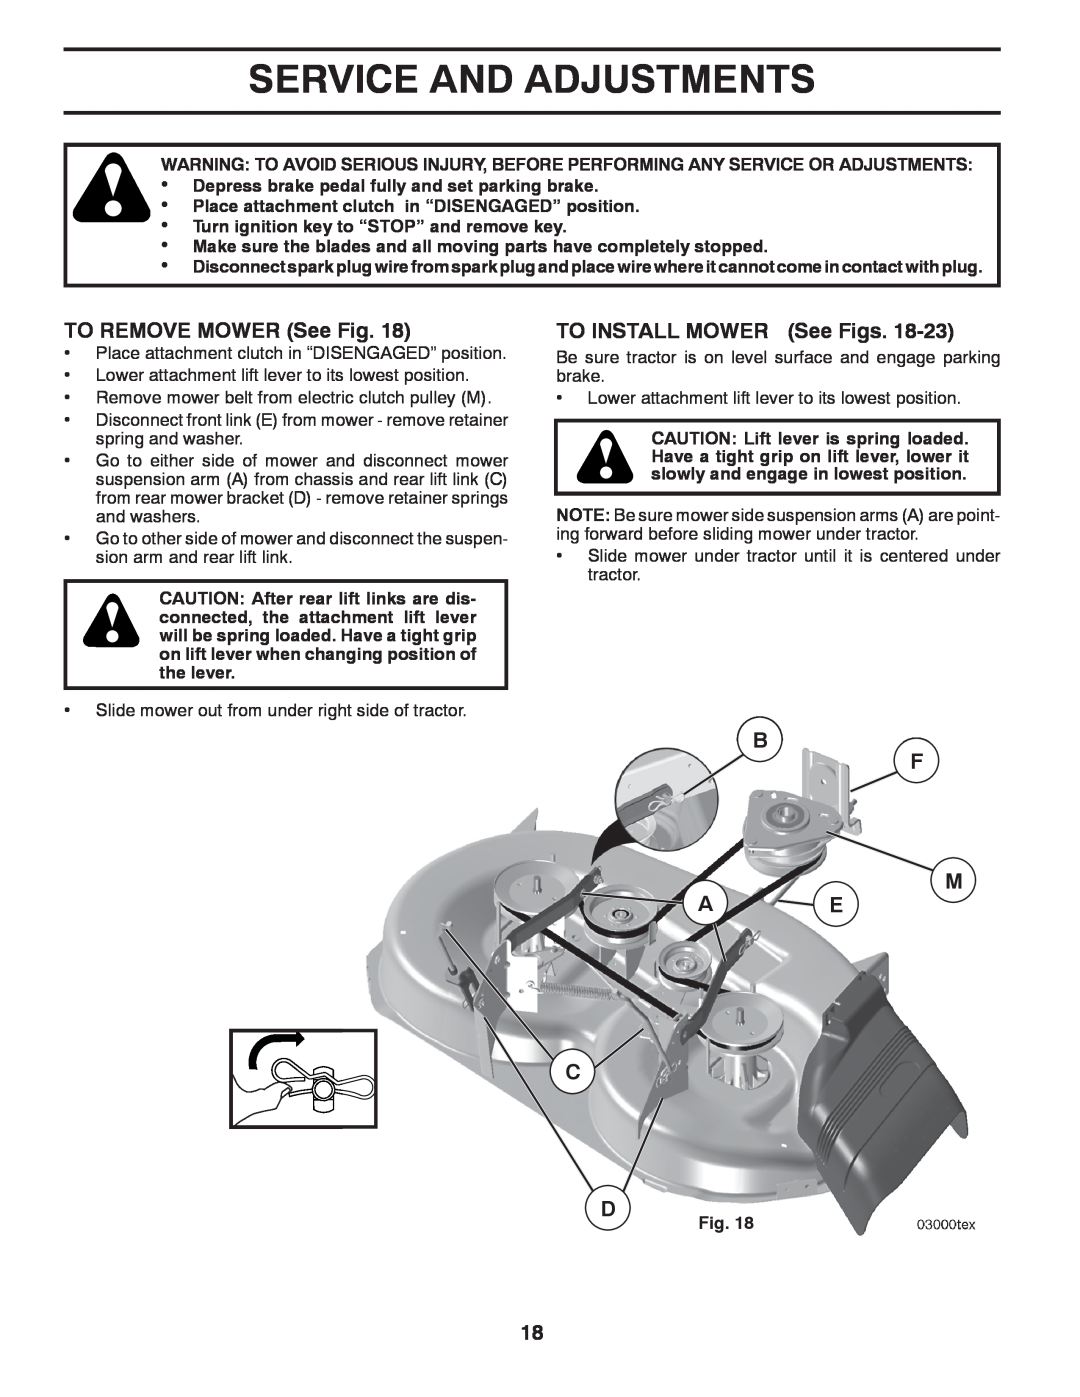 Husqvarna YTH2042TD manual Service And Adjustments, TO REMOVE MOWER See Fig, TO INSTALL MOWER See Figs, B F M A E C D 